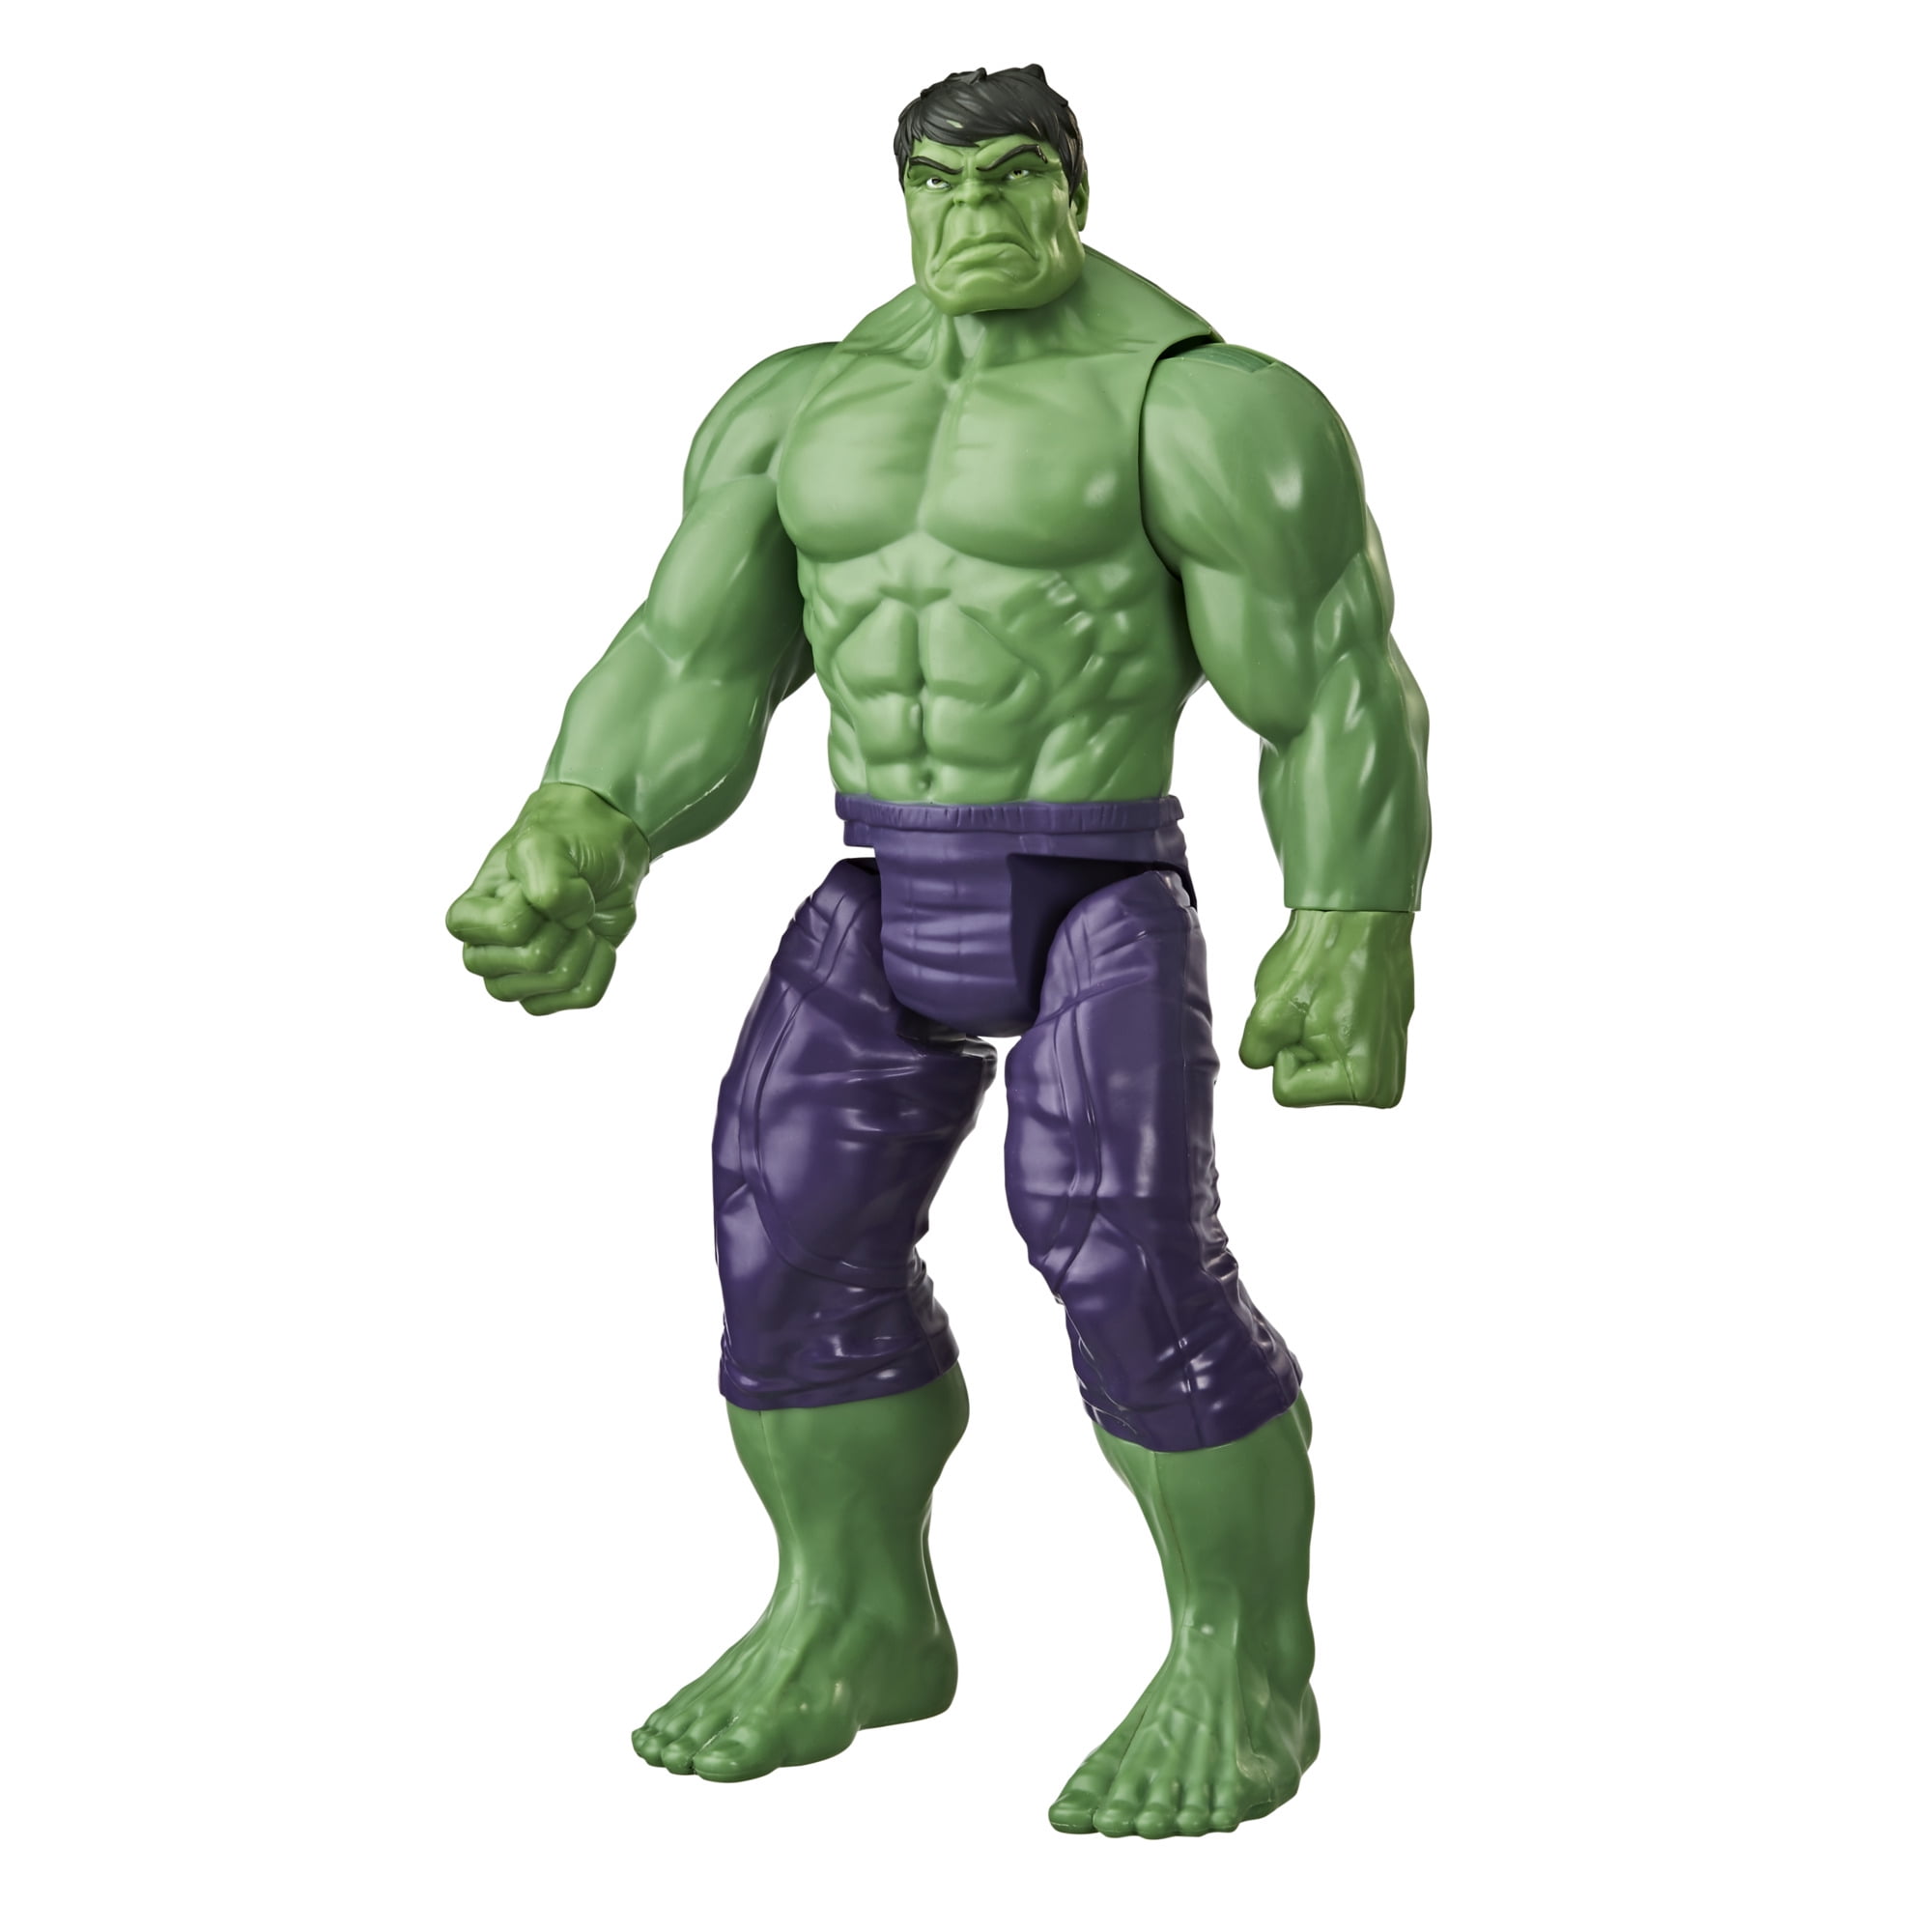 Details about   Marvel The Avengers Figure Super Heroes Iron Man Hulk Action Figures Toys 17cm 